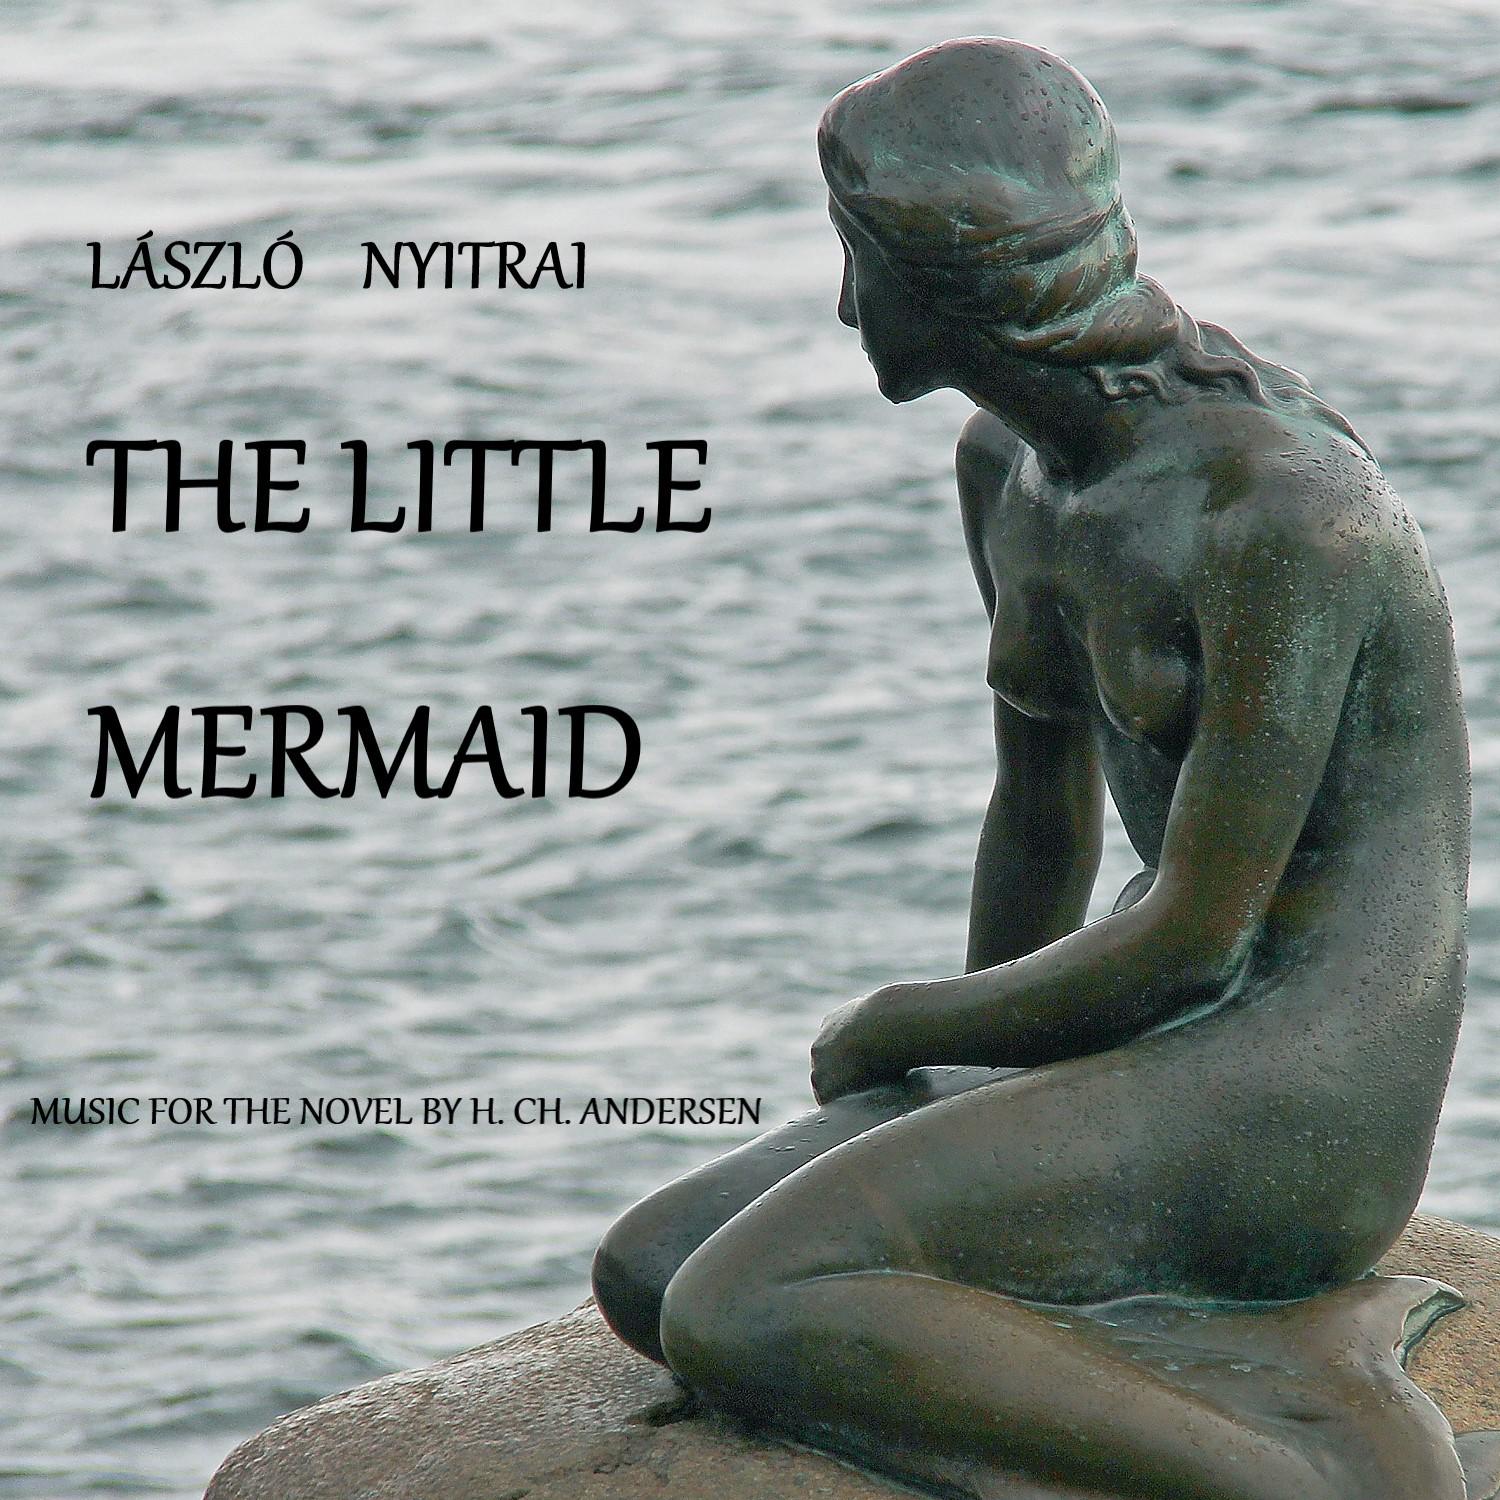 The second song of the little mermaid